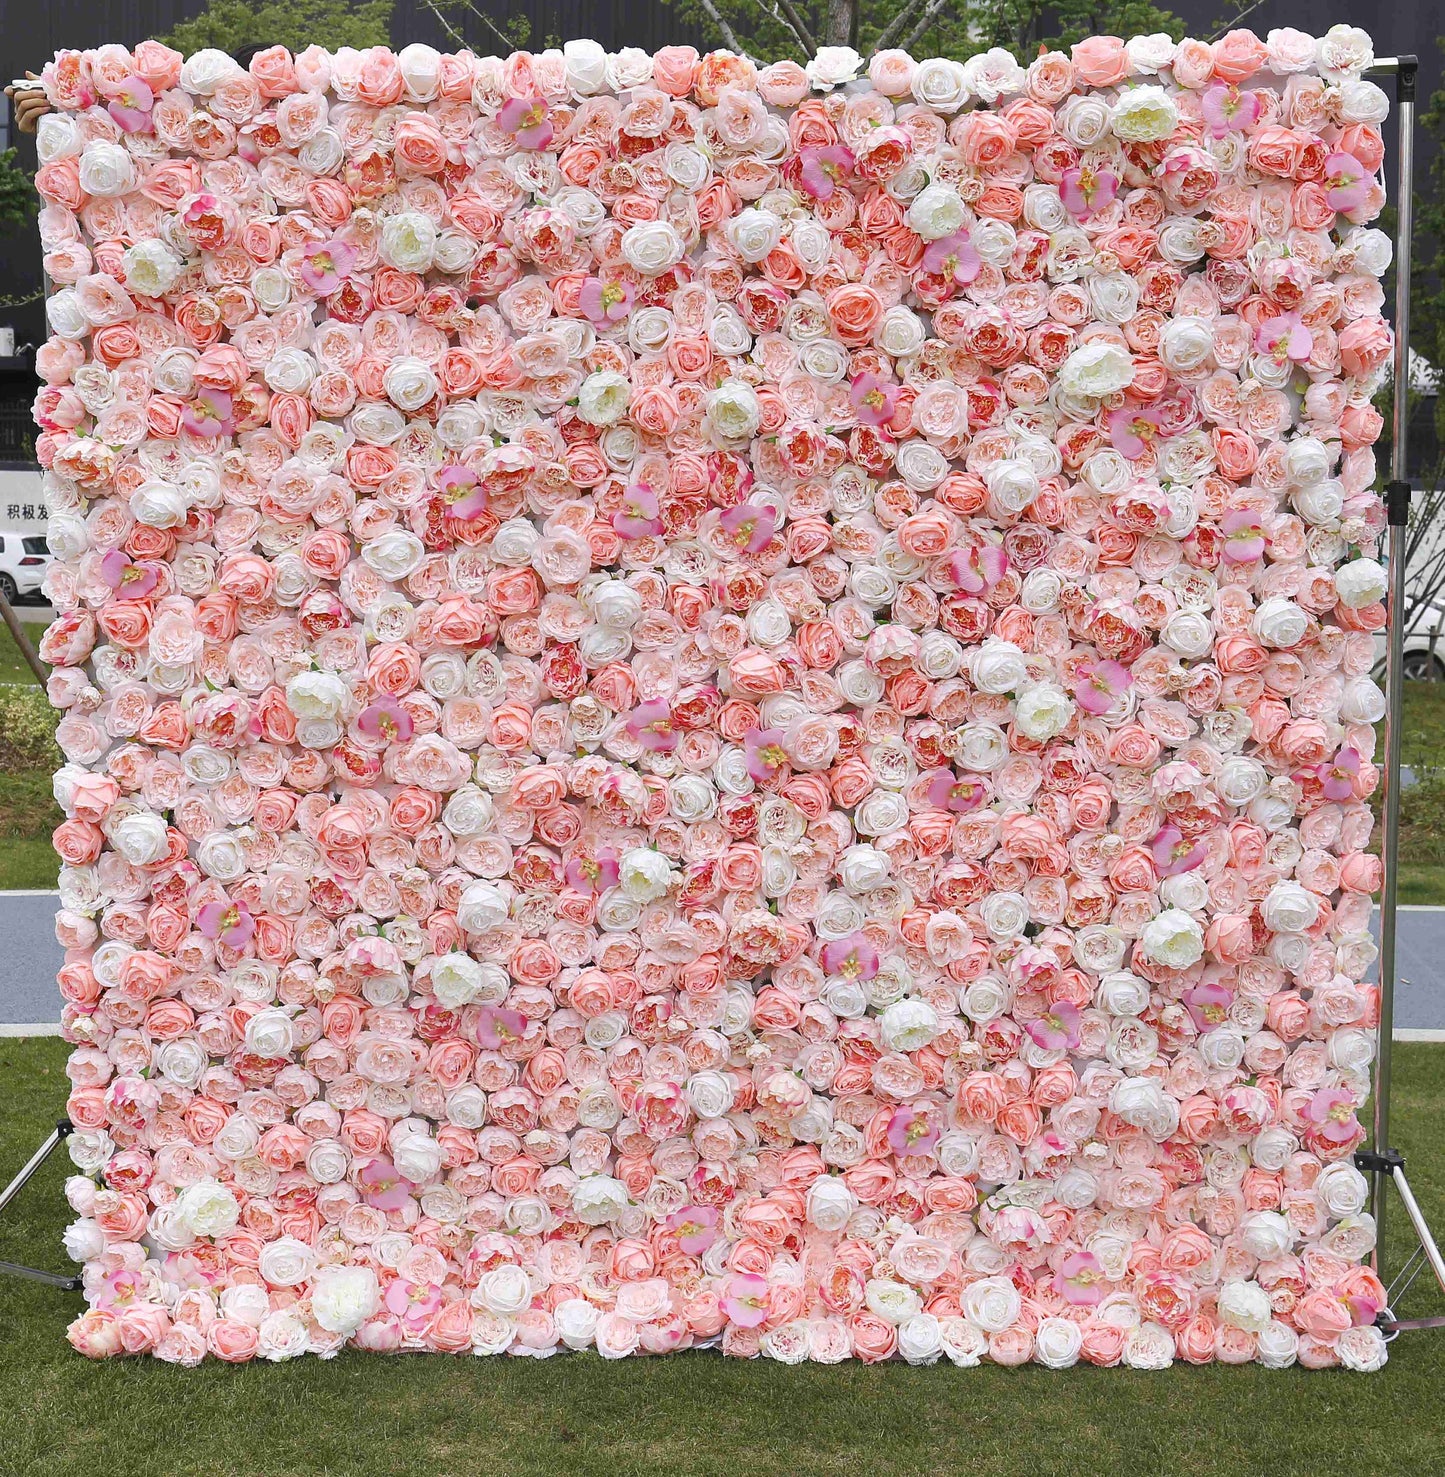 Champagne Pink Floral Wall For Wedding Arrangement Event Salon Party Photography Backdrop Fabric Rolling Up Curtain Fabric Cloth